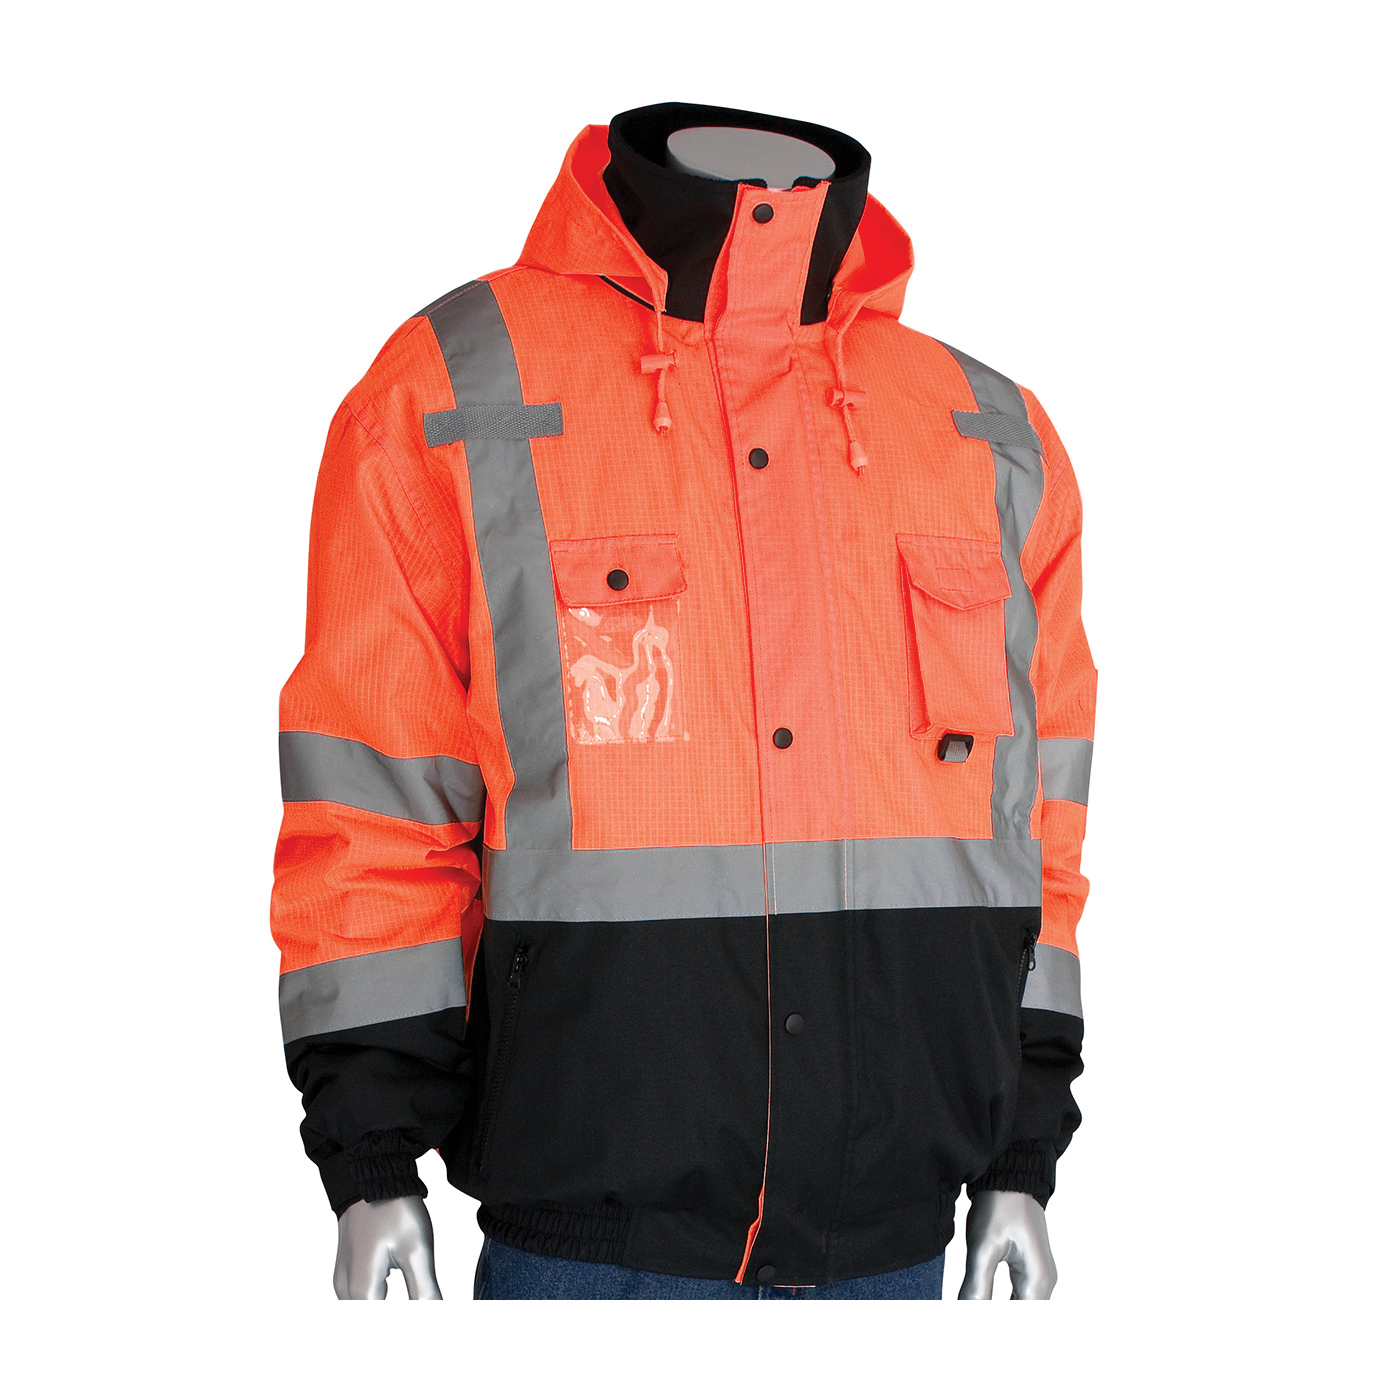 PIP® 333-1770-OR/5X Bomber Jacket With Zip-Out Fleece Liner, Hi-Viz Orange, Polyester, 74 in Chest, Resists: Water, Specifications Met: ANSI 107 Class 3 Type R